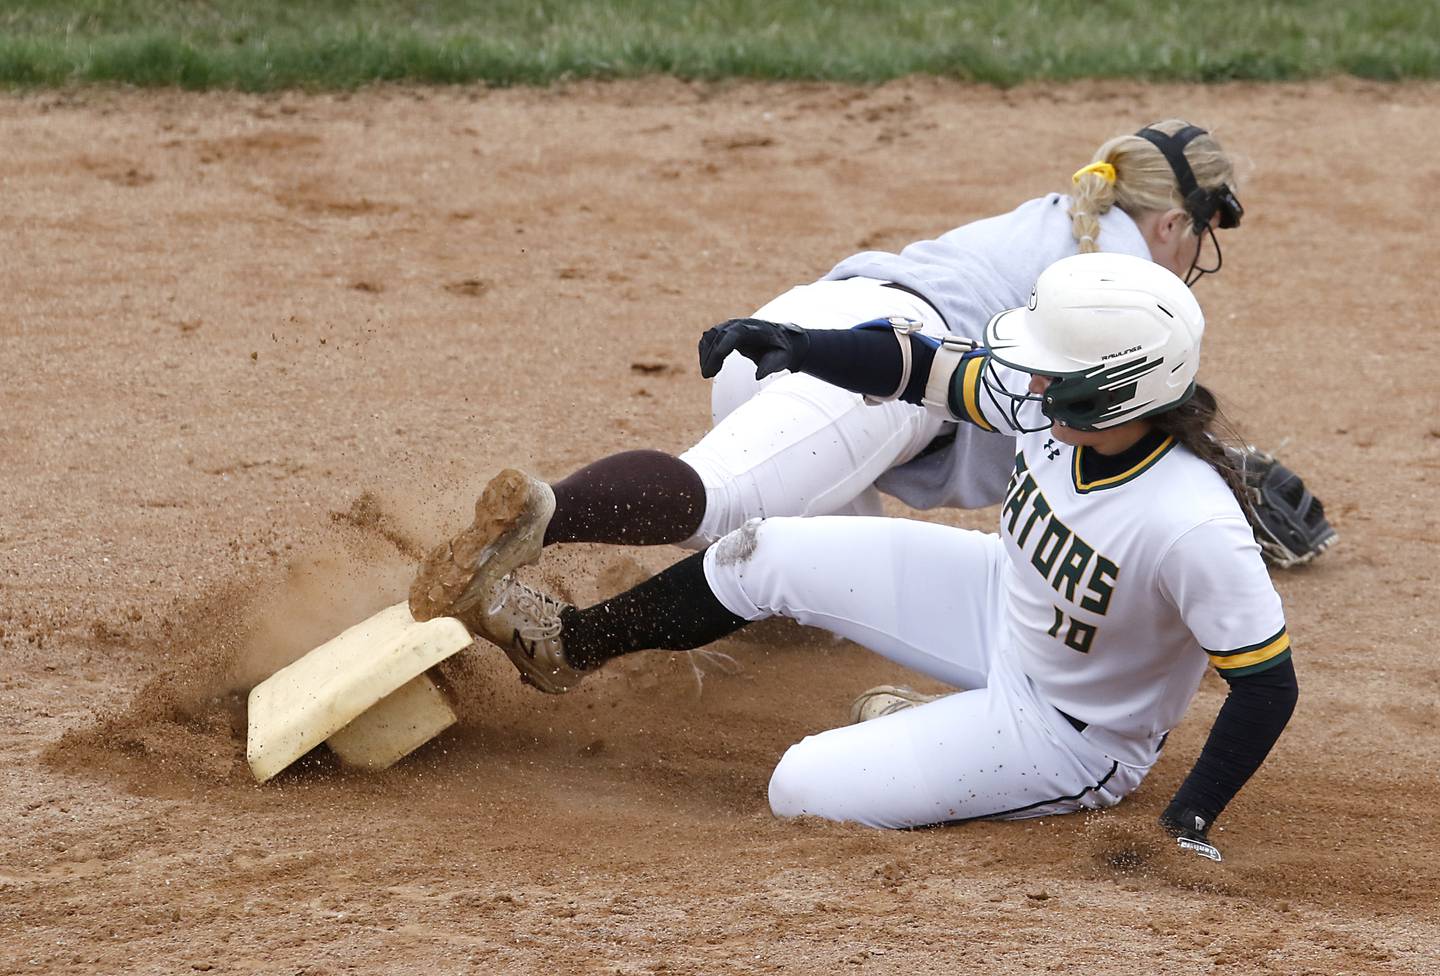 Crystal Lake South's Alexis Pupillo slides into second bas as Jacobs’s Anna Cook tries to field the ball during a Fox Valley Conference softball game Monday, April 25, 2022, between Crystal Lake South  and Jacobs at Crystal Lake South High School.